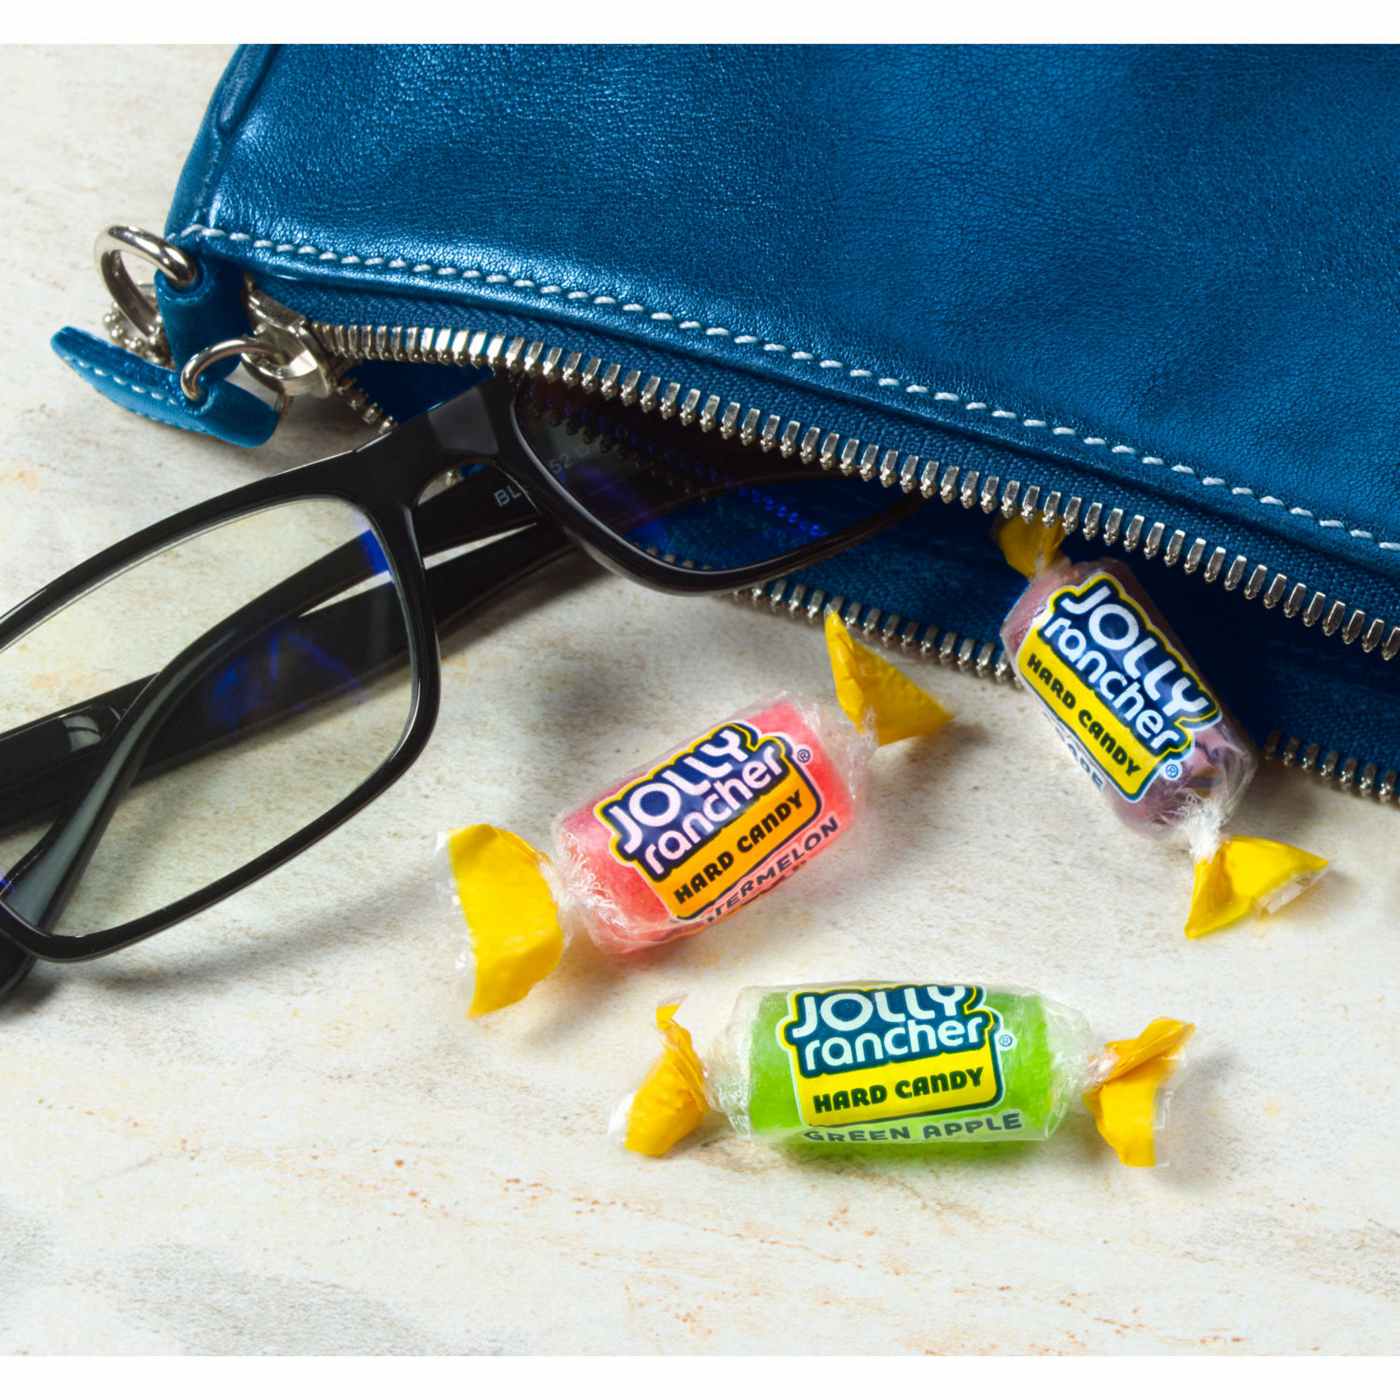 Jolly Rancher Original Fruit Flavored Hard Candy; image 6 of 7